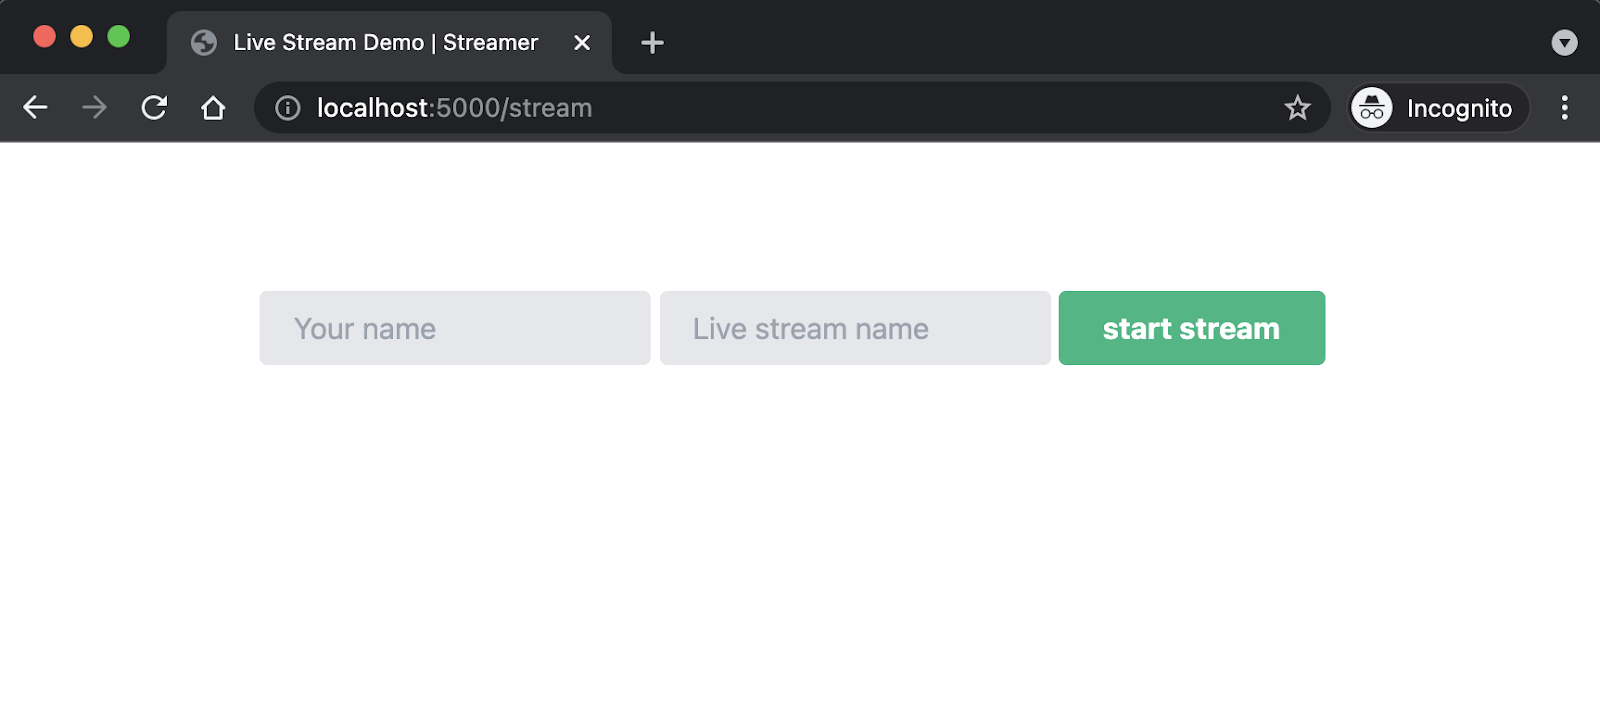 Two inputs, one for your name and one for the live stream name, and a "start stream" button